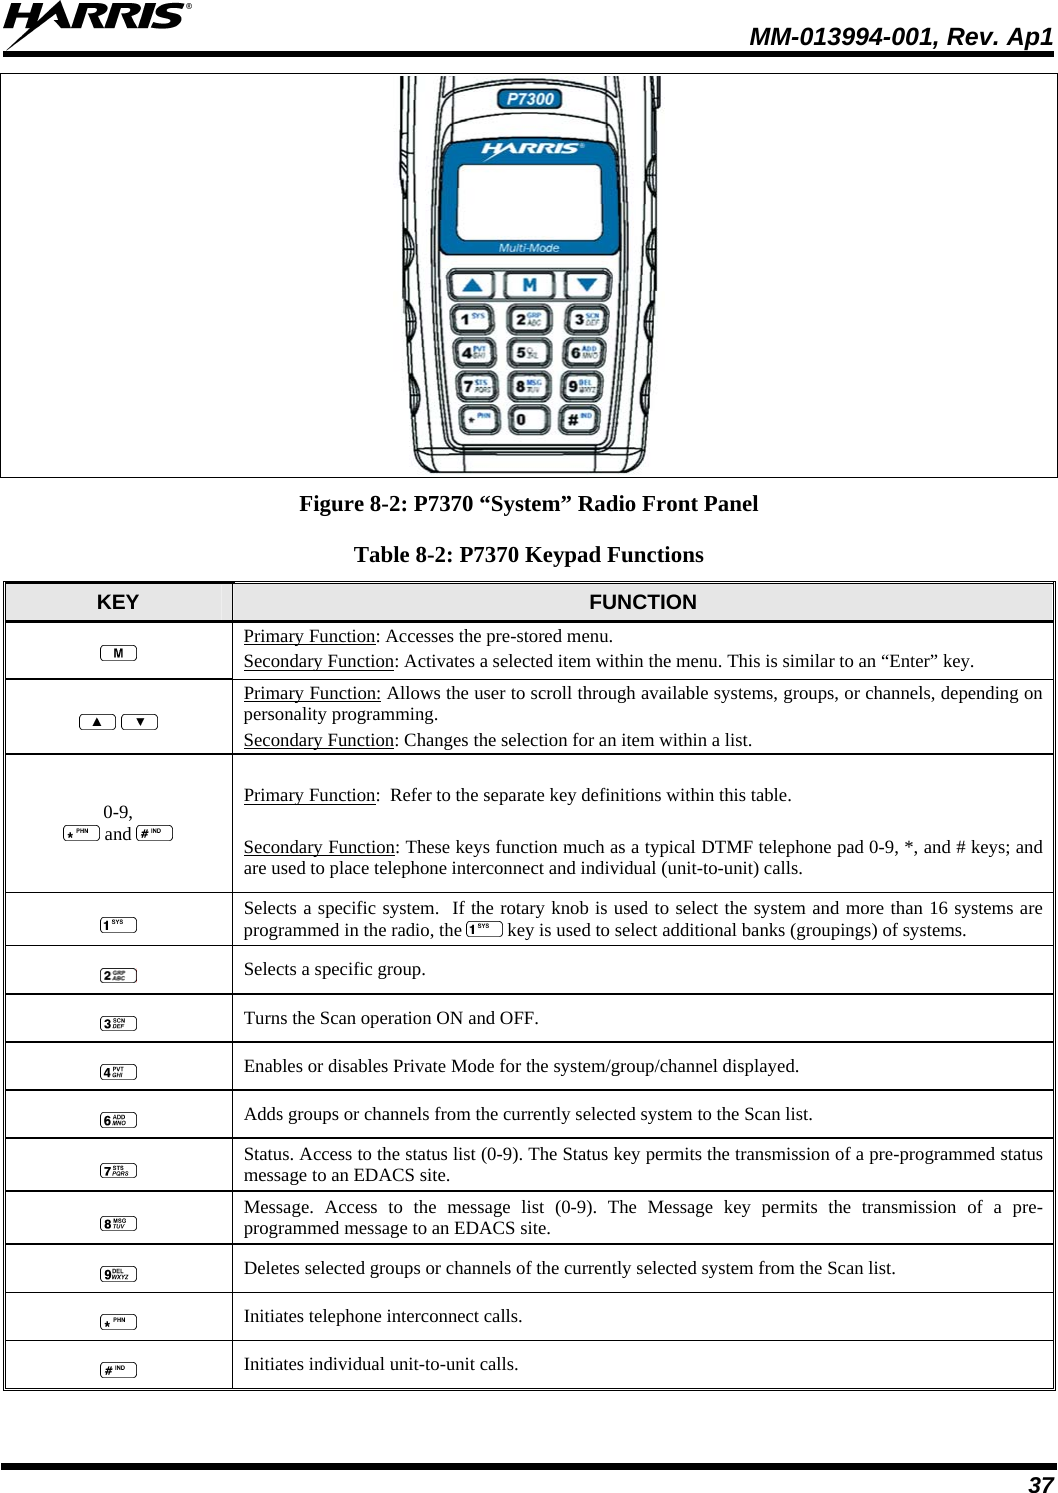  MM-013994-001, Rev. Ap1 37  Figure 8-2: P7370 “System” Radio Front Panel Table 8-2: P7370 Keypad Functions KEY  FUNCTION Primary Function: Accesses the pre-stored menu.  Secondary Function: Activates a selected item within the menu. This is similar to an “Enter” key.    Primary Function: Allows the user to scroll through available systems, groups, or channels, depending on personality programming.  Secondary Function: Changes the selection for an item within a list. 0-9,  and   Primary Function:  Refer to the separate key definitions within this table. Secondary Function: These keys function much as a typical DTMF telephone pad 0-9, *, and # keys; and are used to place telephone interconnect and individual (unit-to-unit) calls.  Selects a specific system.  If the rotary knob is used to select the system and more than 16 systems are programmed in the radio, the   key is used to select additional banks (groupings) of systems.  Selects a specific group.  Turns the Scan operation ON and OFF.  Enables or disables Private Mode for the system/group/channel displayed.  Adds groups or channels from the currently selected system to the Scan list.  Status. Access to the status list (0-9). The Status key permits the transmission of a pre-programmed status message to an EDACS site.  Message. Access to the message list (0-9). The Message key permits the transmission of a pre-programmed message to an EDACS site.  Deletes selected groups or channels of the currently selected system from the Scan list.  Initiates telephone interconnect calls.  Initiates individual unit-to-unit calls. 